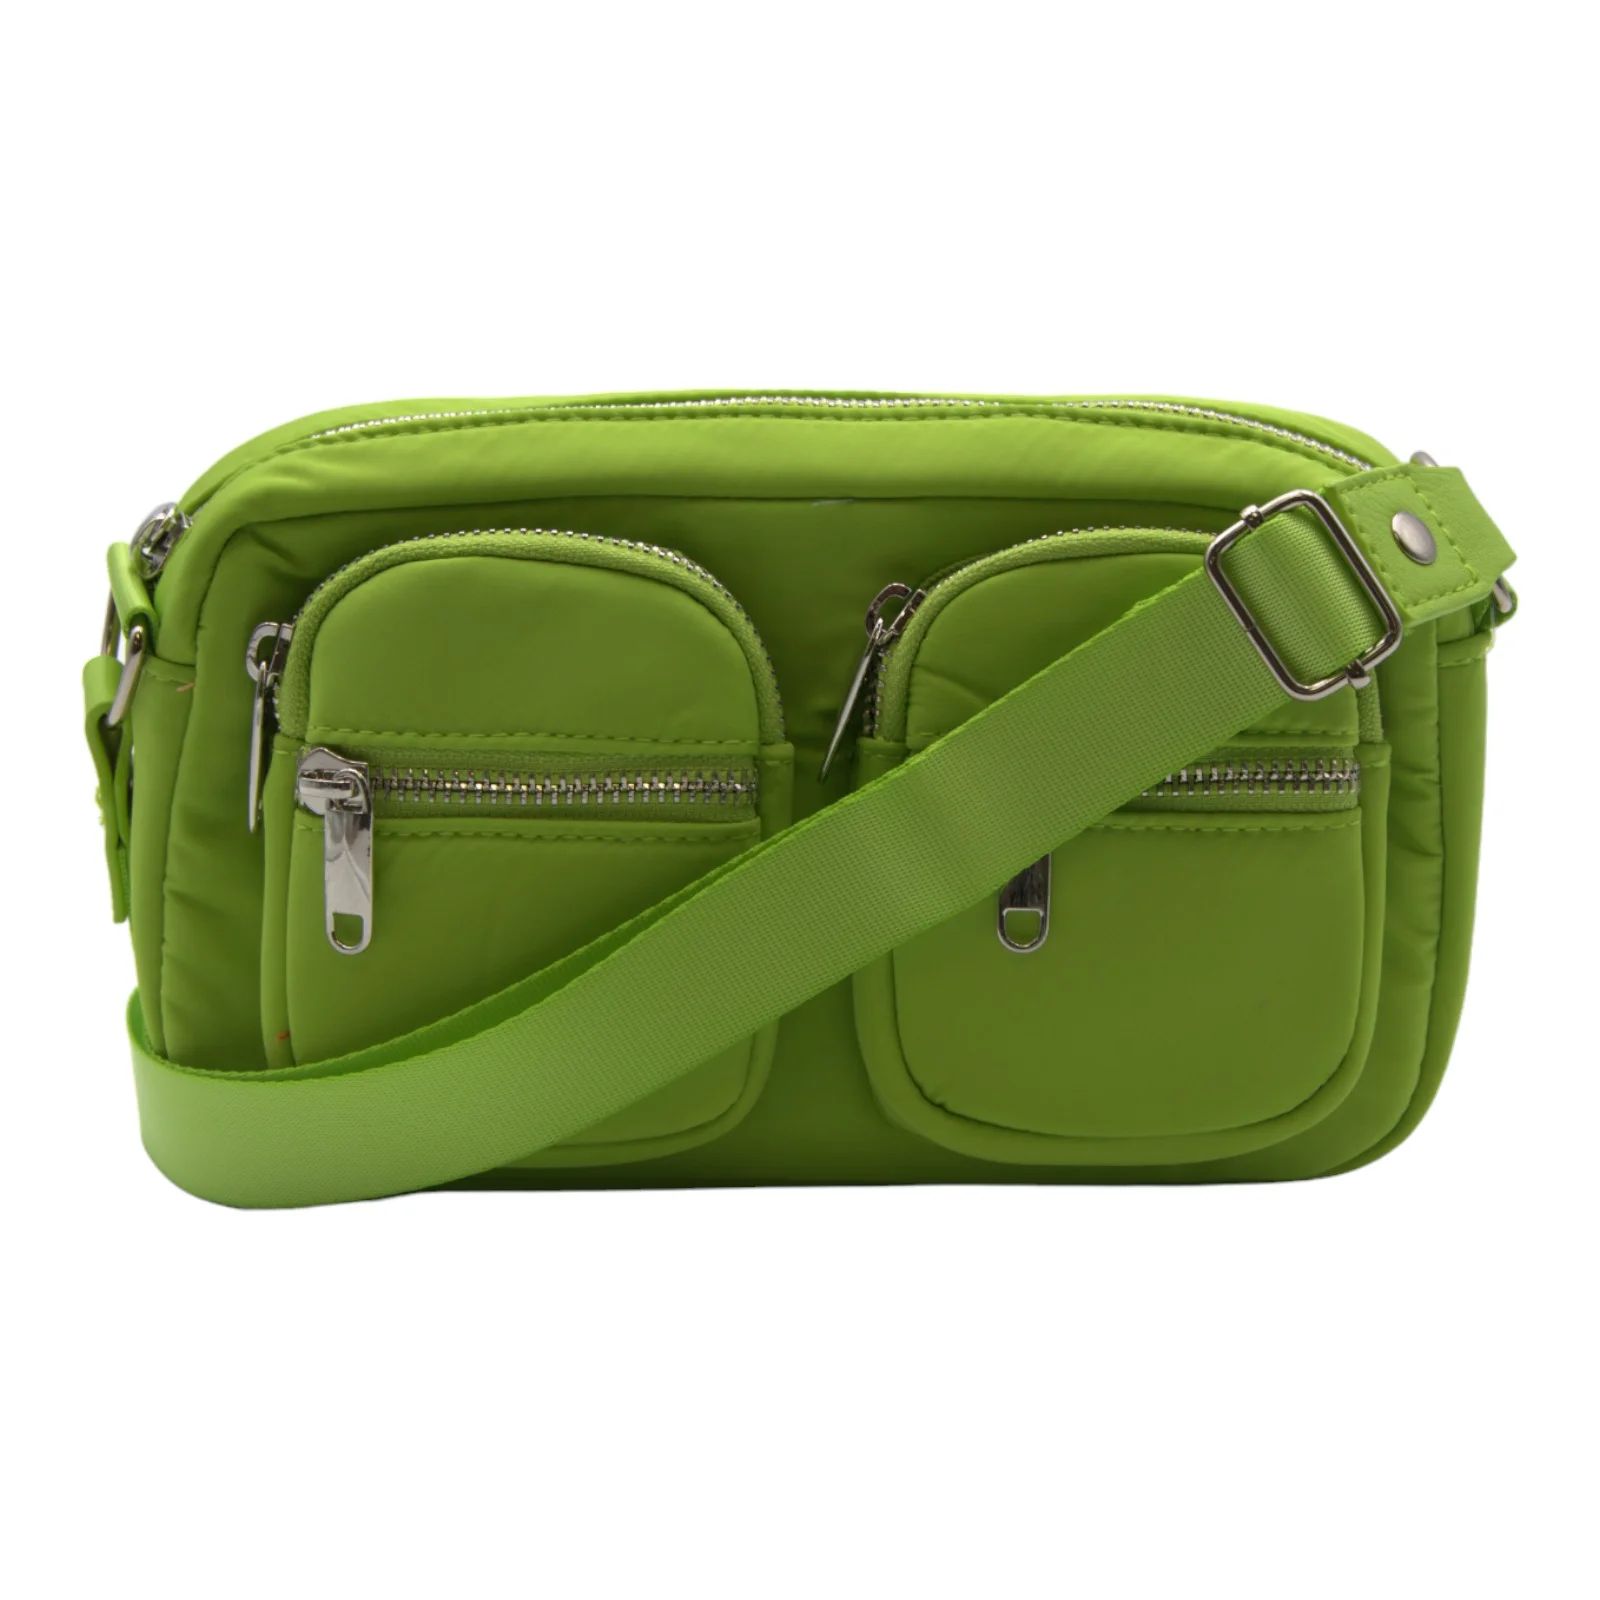 Wild Fable Crossbody Bag with Pockets Lime Green | Walmart (US)